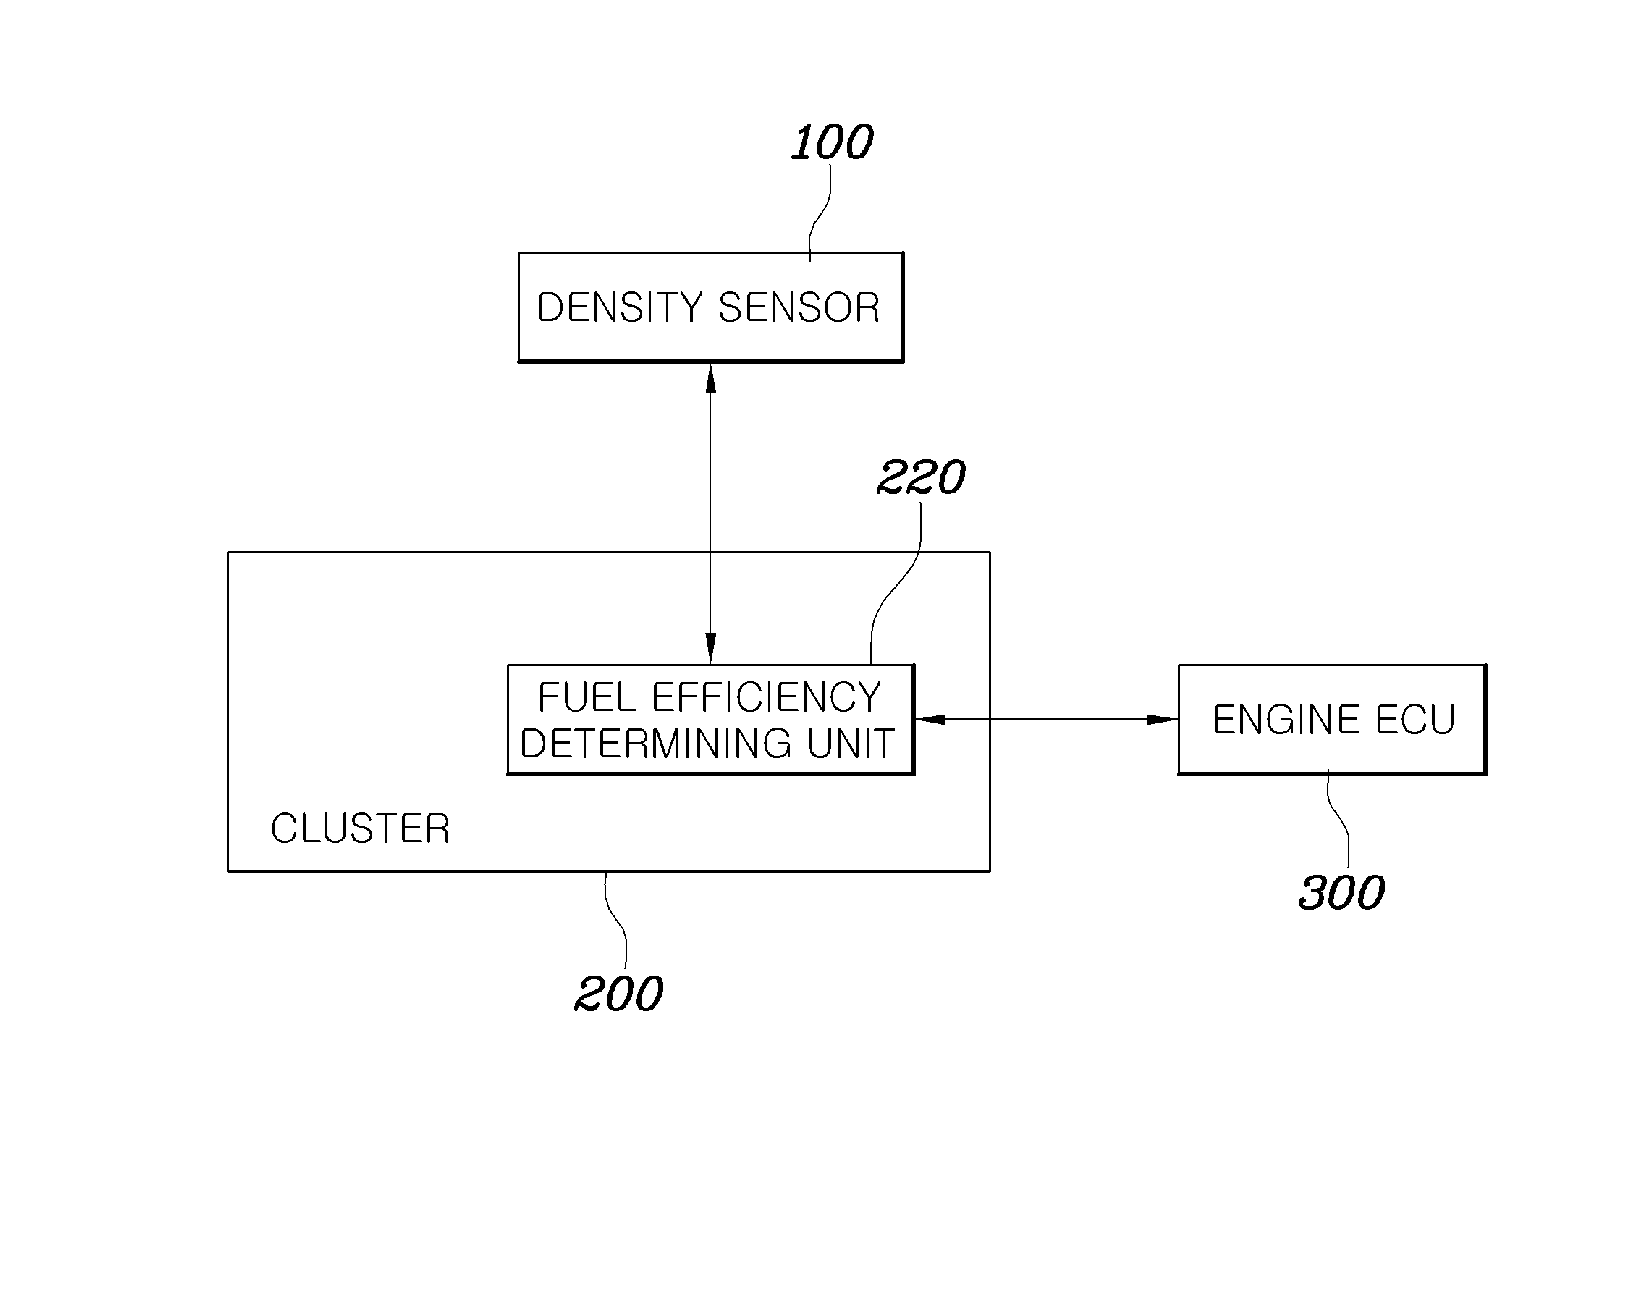 System and method for indicating fuel efficiency of flexible fuel vehicle